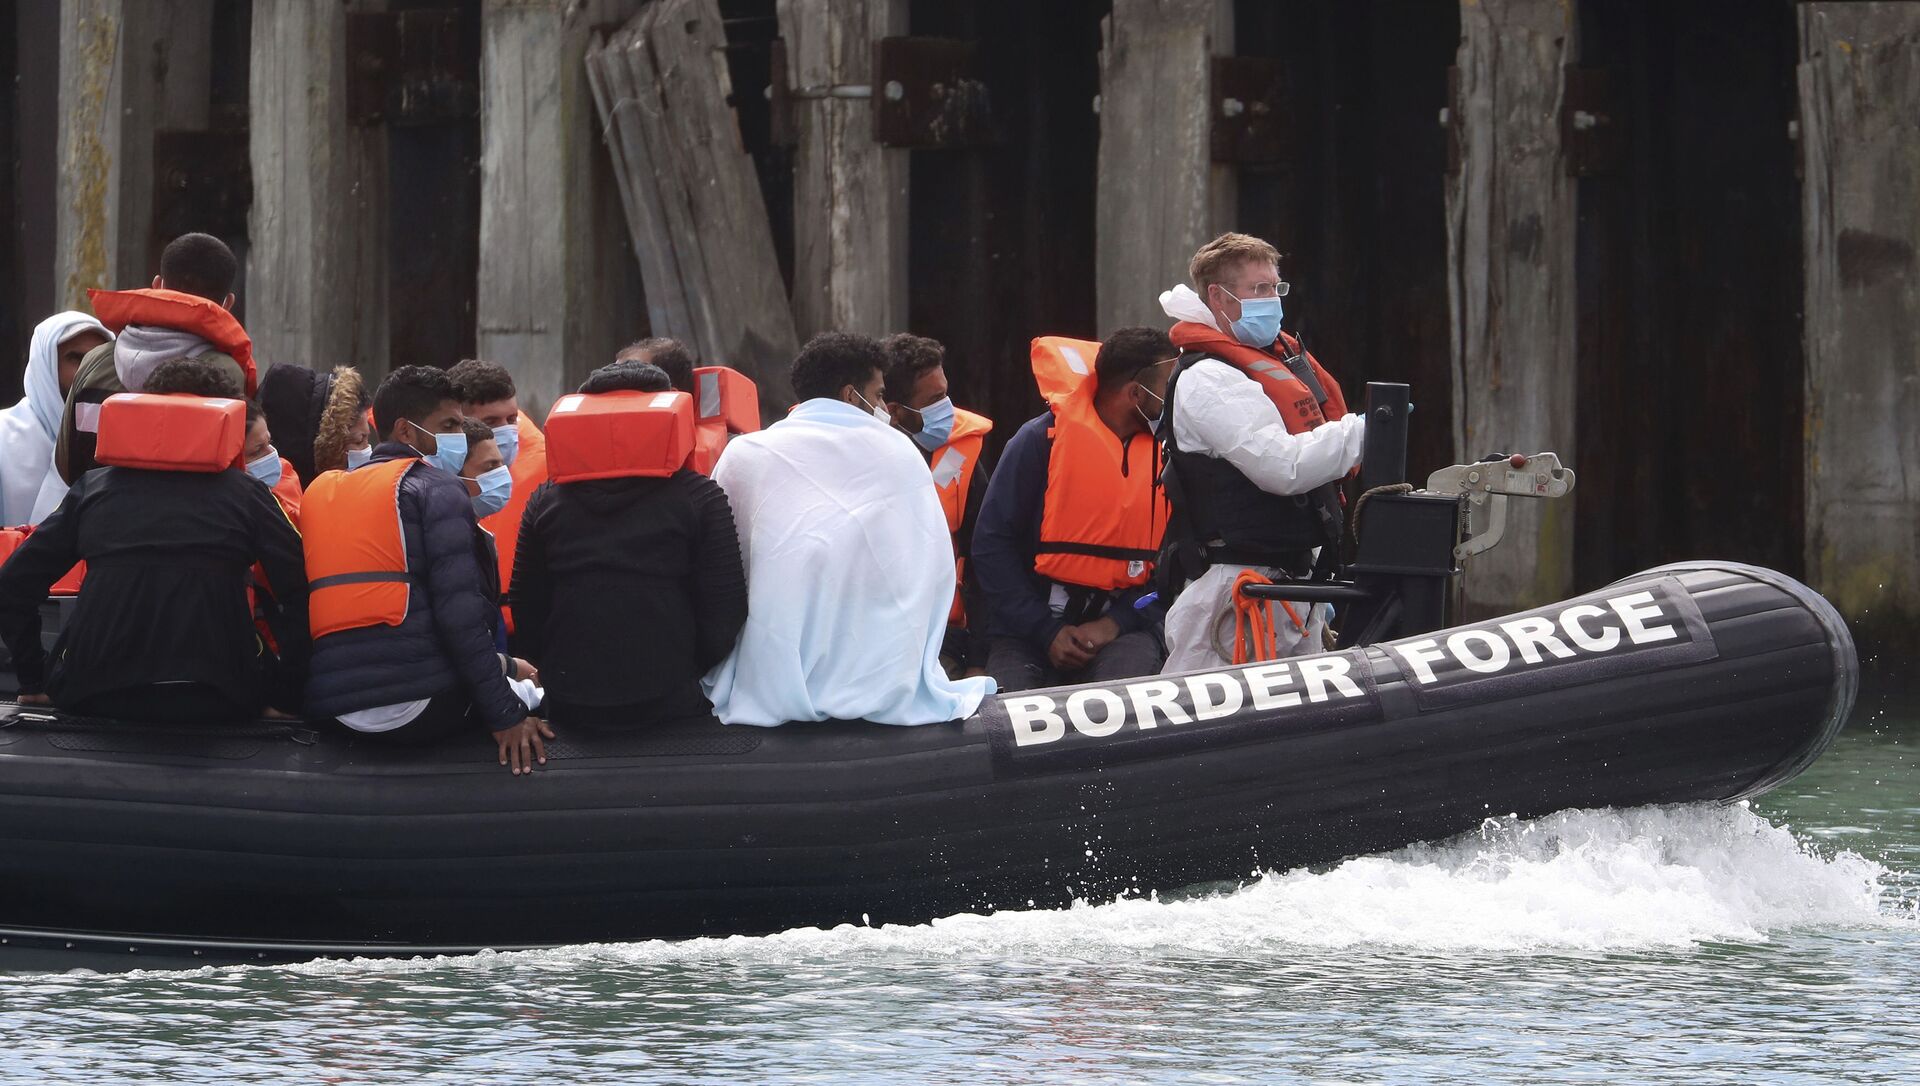 A British Border Force vessel carries a group of men thought to be migrants into Dover harbour, Southern England, Tuesday Aug. 4, 2020. - Sputnik International, 1920, 19.11.2021